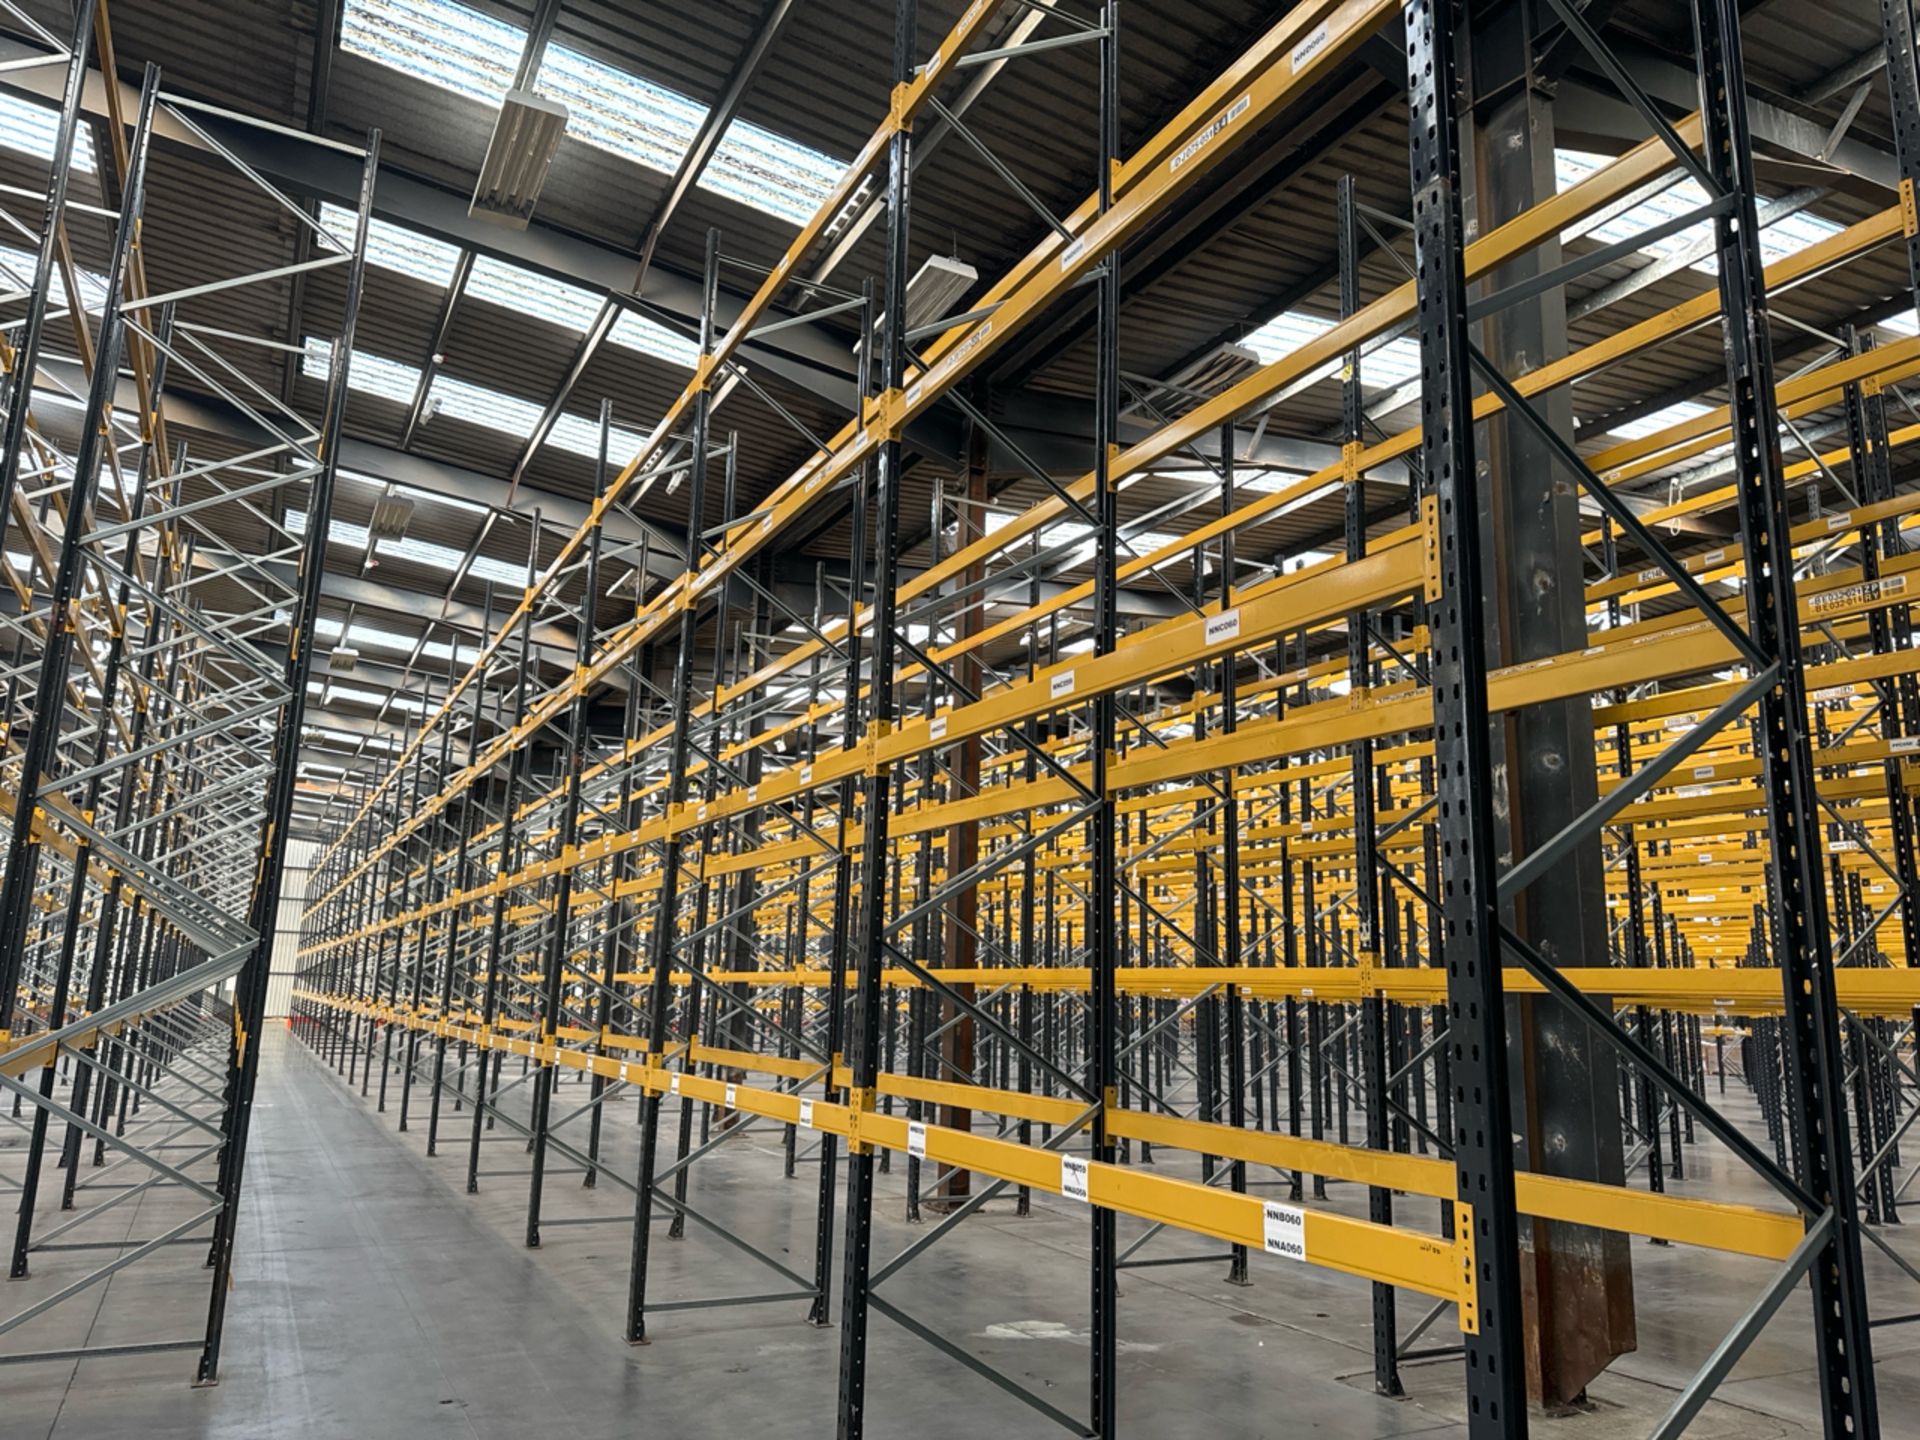 20 Bays Of Boltless Pallet Industrial Racking - Image 4 of 8